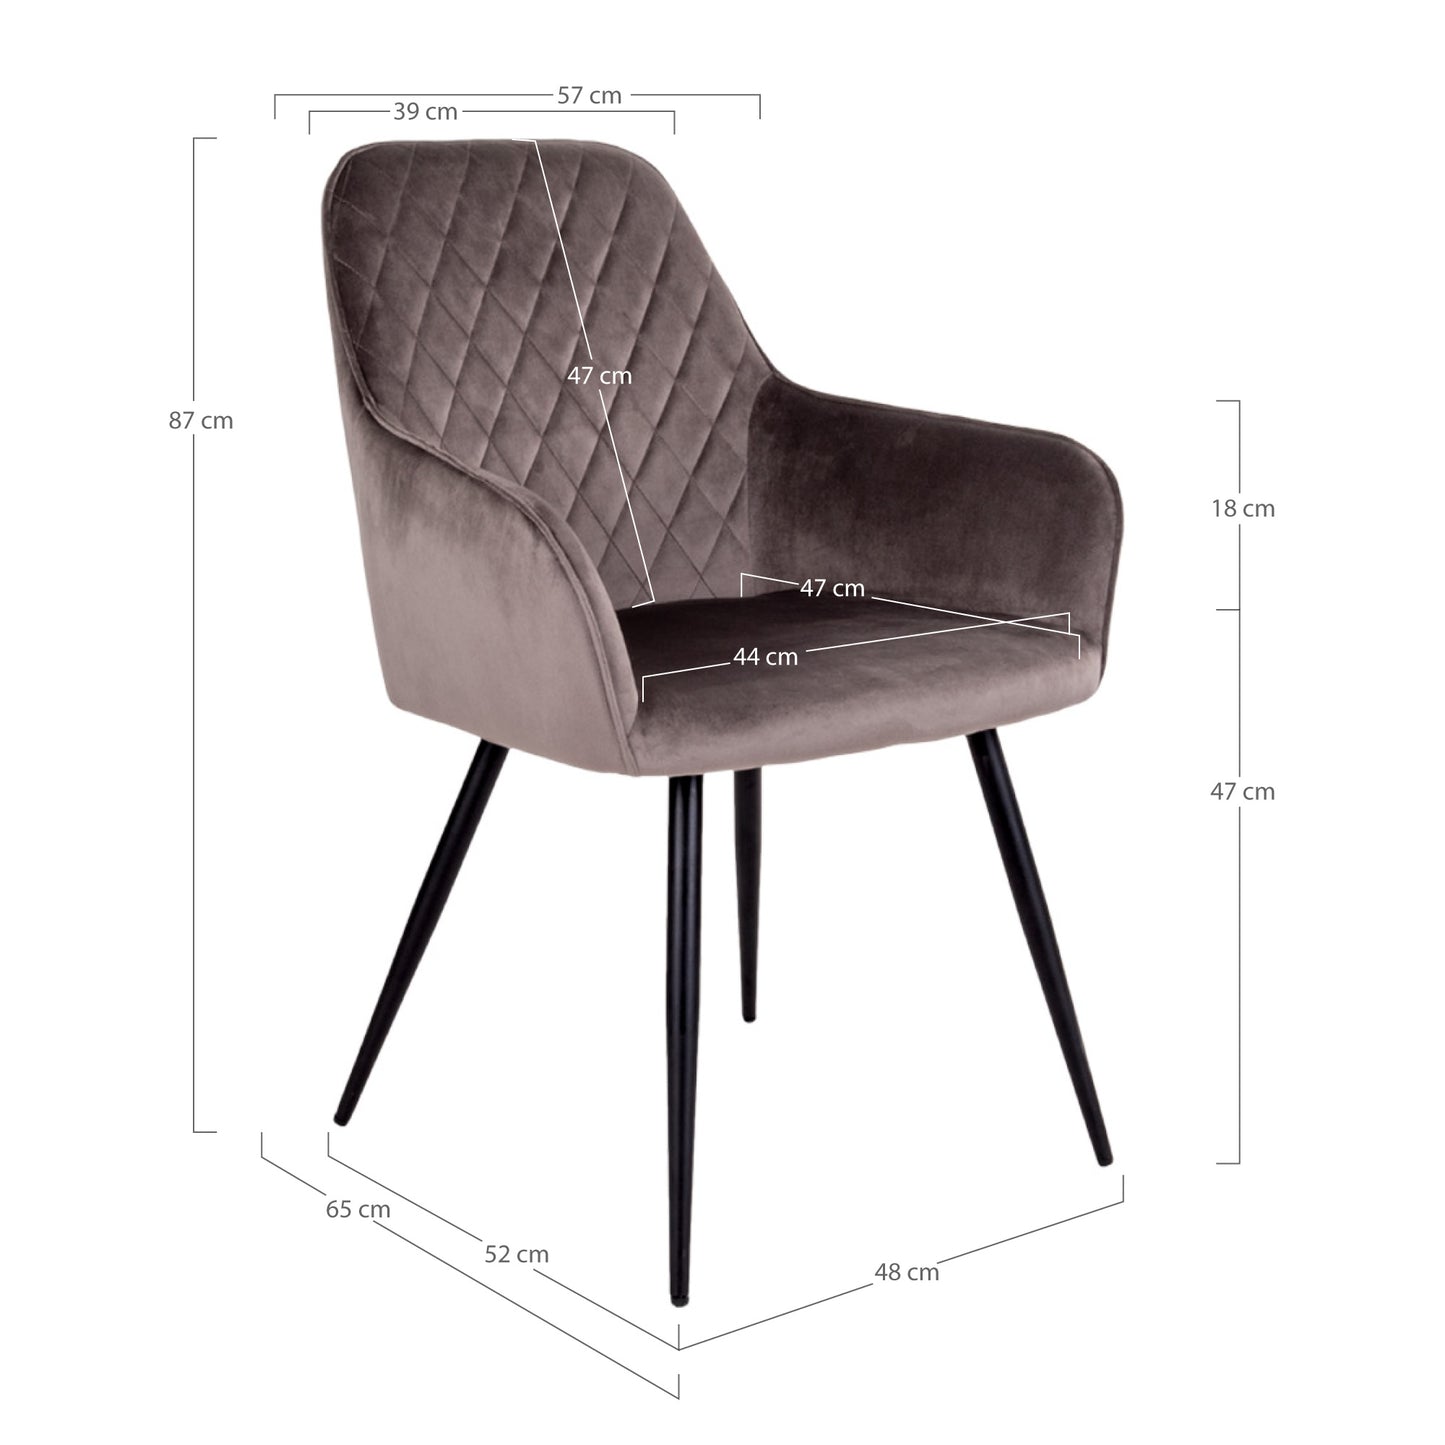 House Nordic - Harbo Dining table chair, Chair in mushroom velour